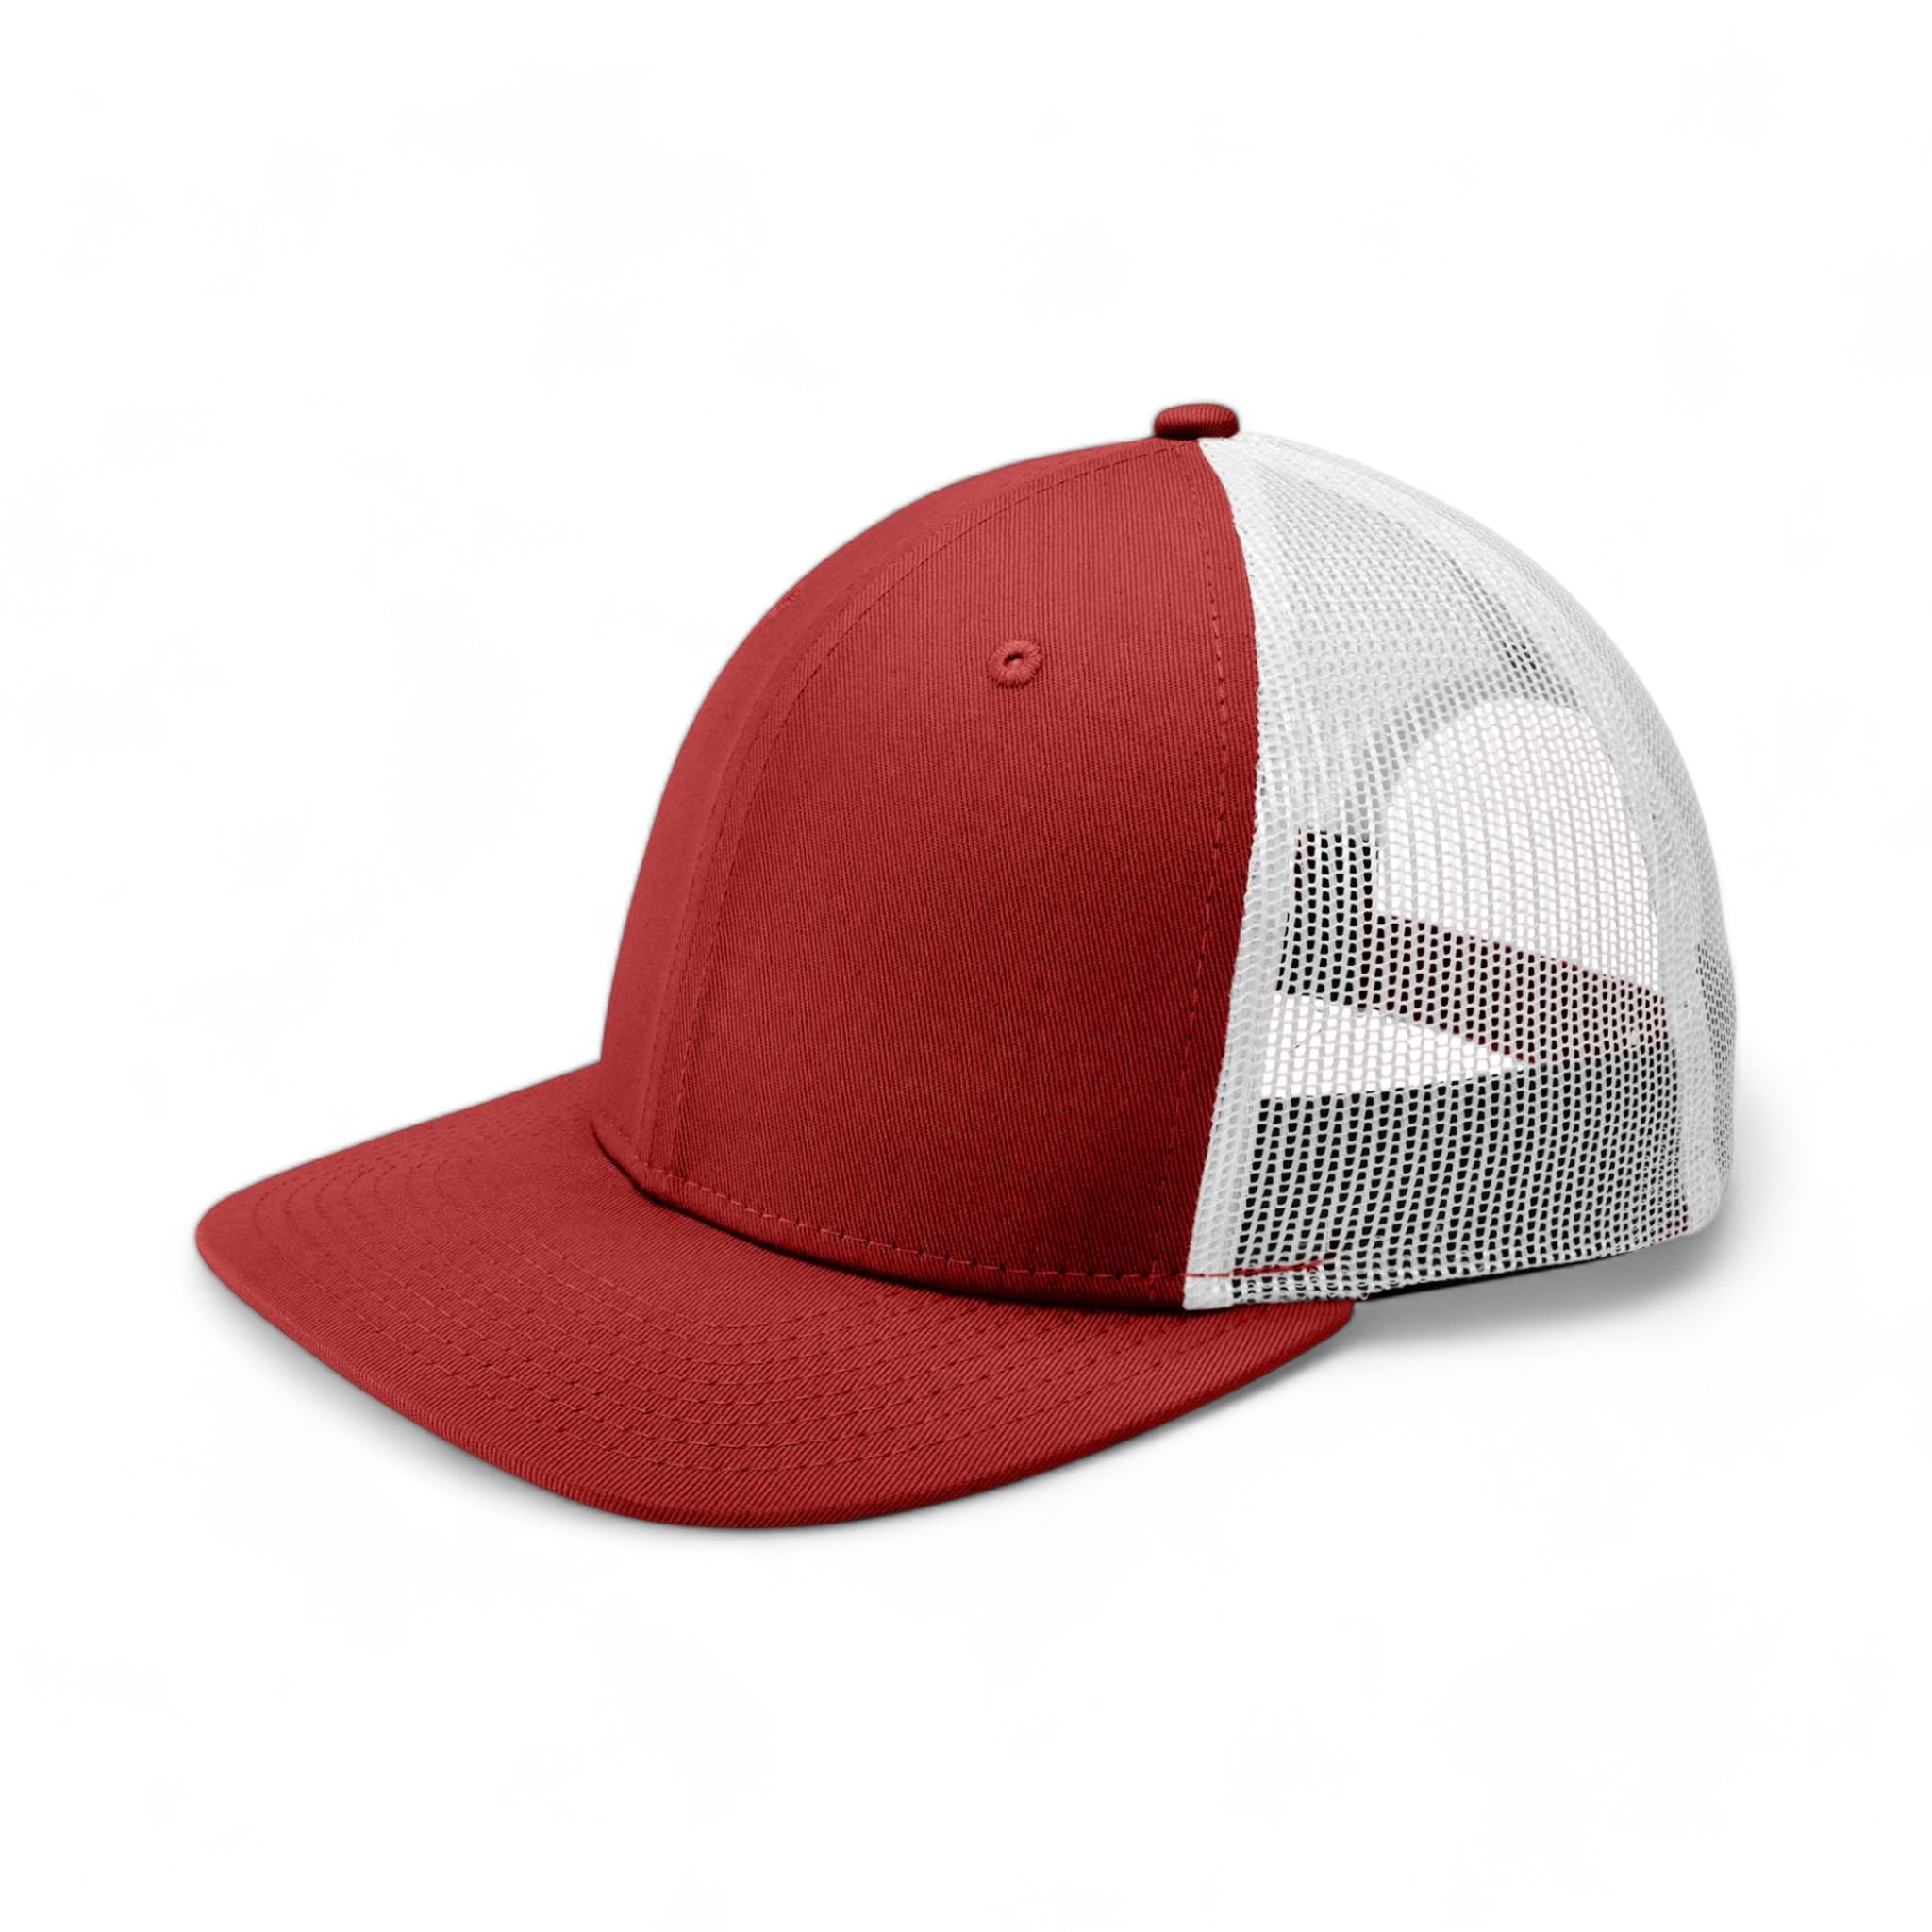 Side view of New Era NE207 custom hat in scarlet and white